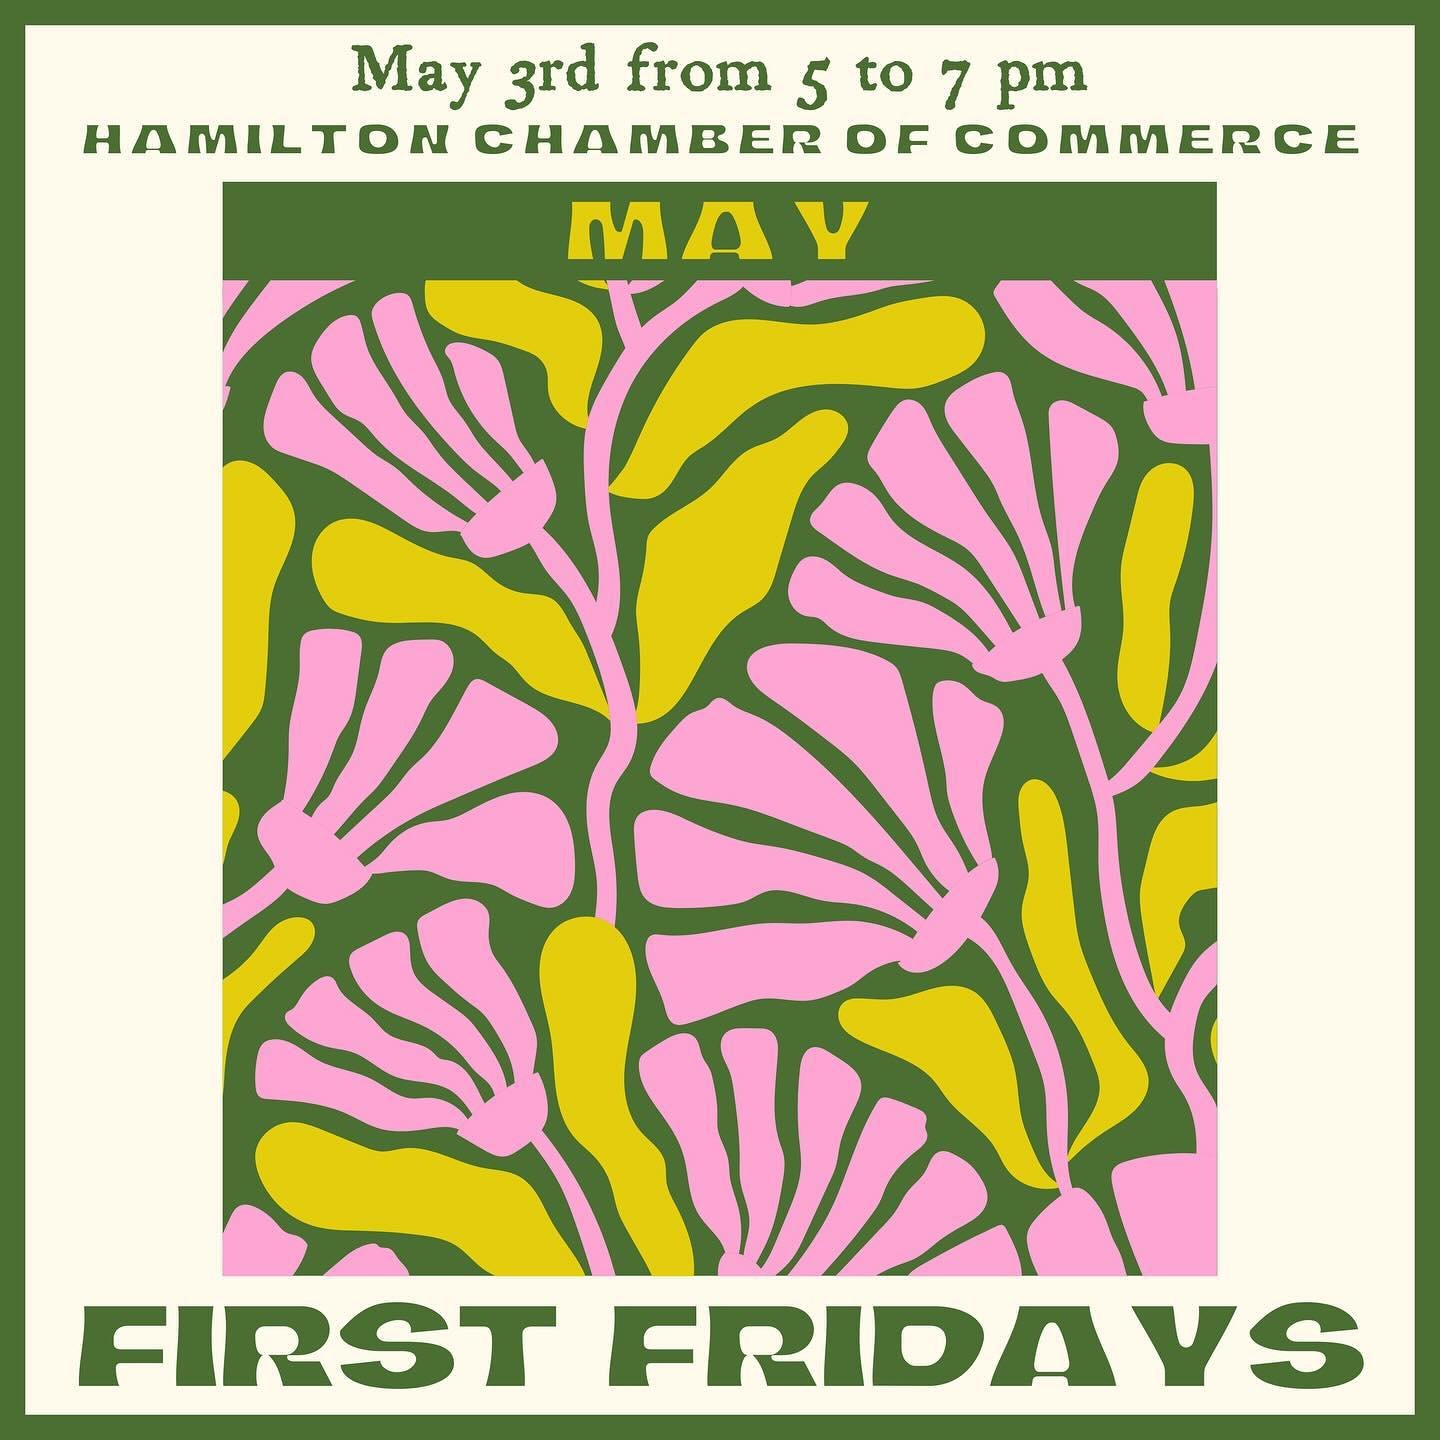 The Hamilton Chamber of Commerce is excited to reintroduce our town-wide &ldquo;Fridays&rdquo; events this spring and summer!

Here&rsquo;s what&rsquo;s in store THIS Friday, May 3rd, from 5 to 7 pm! 

LATE NIGHT SHOPPING: 

@adorn_vintage / @retrosp